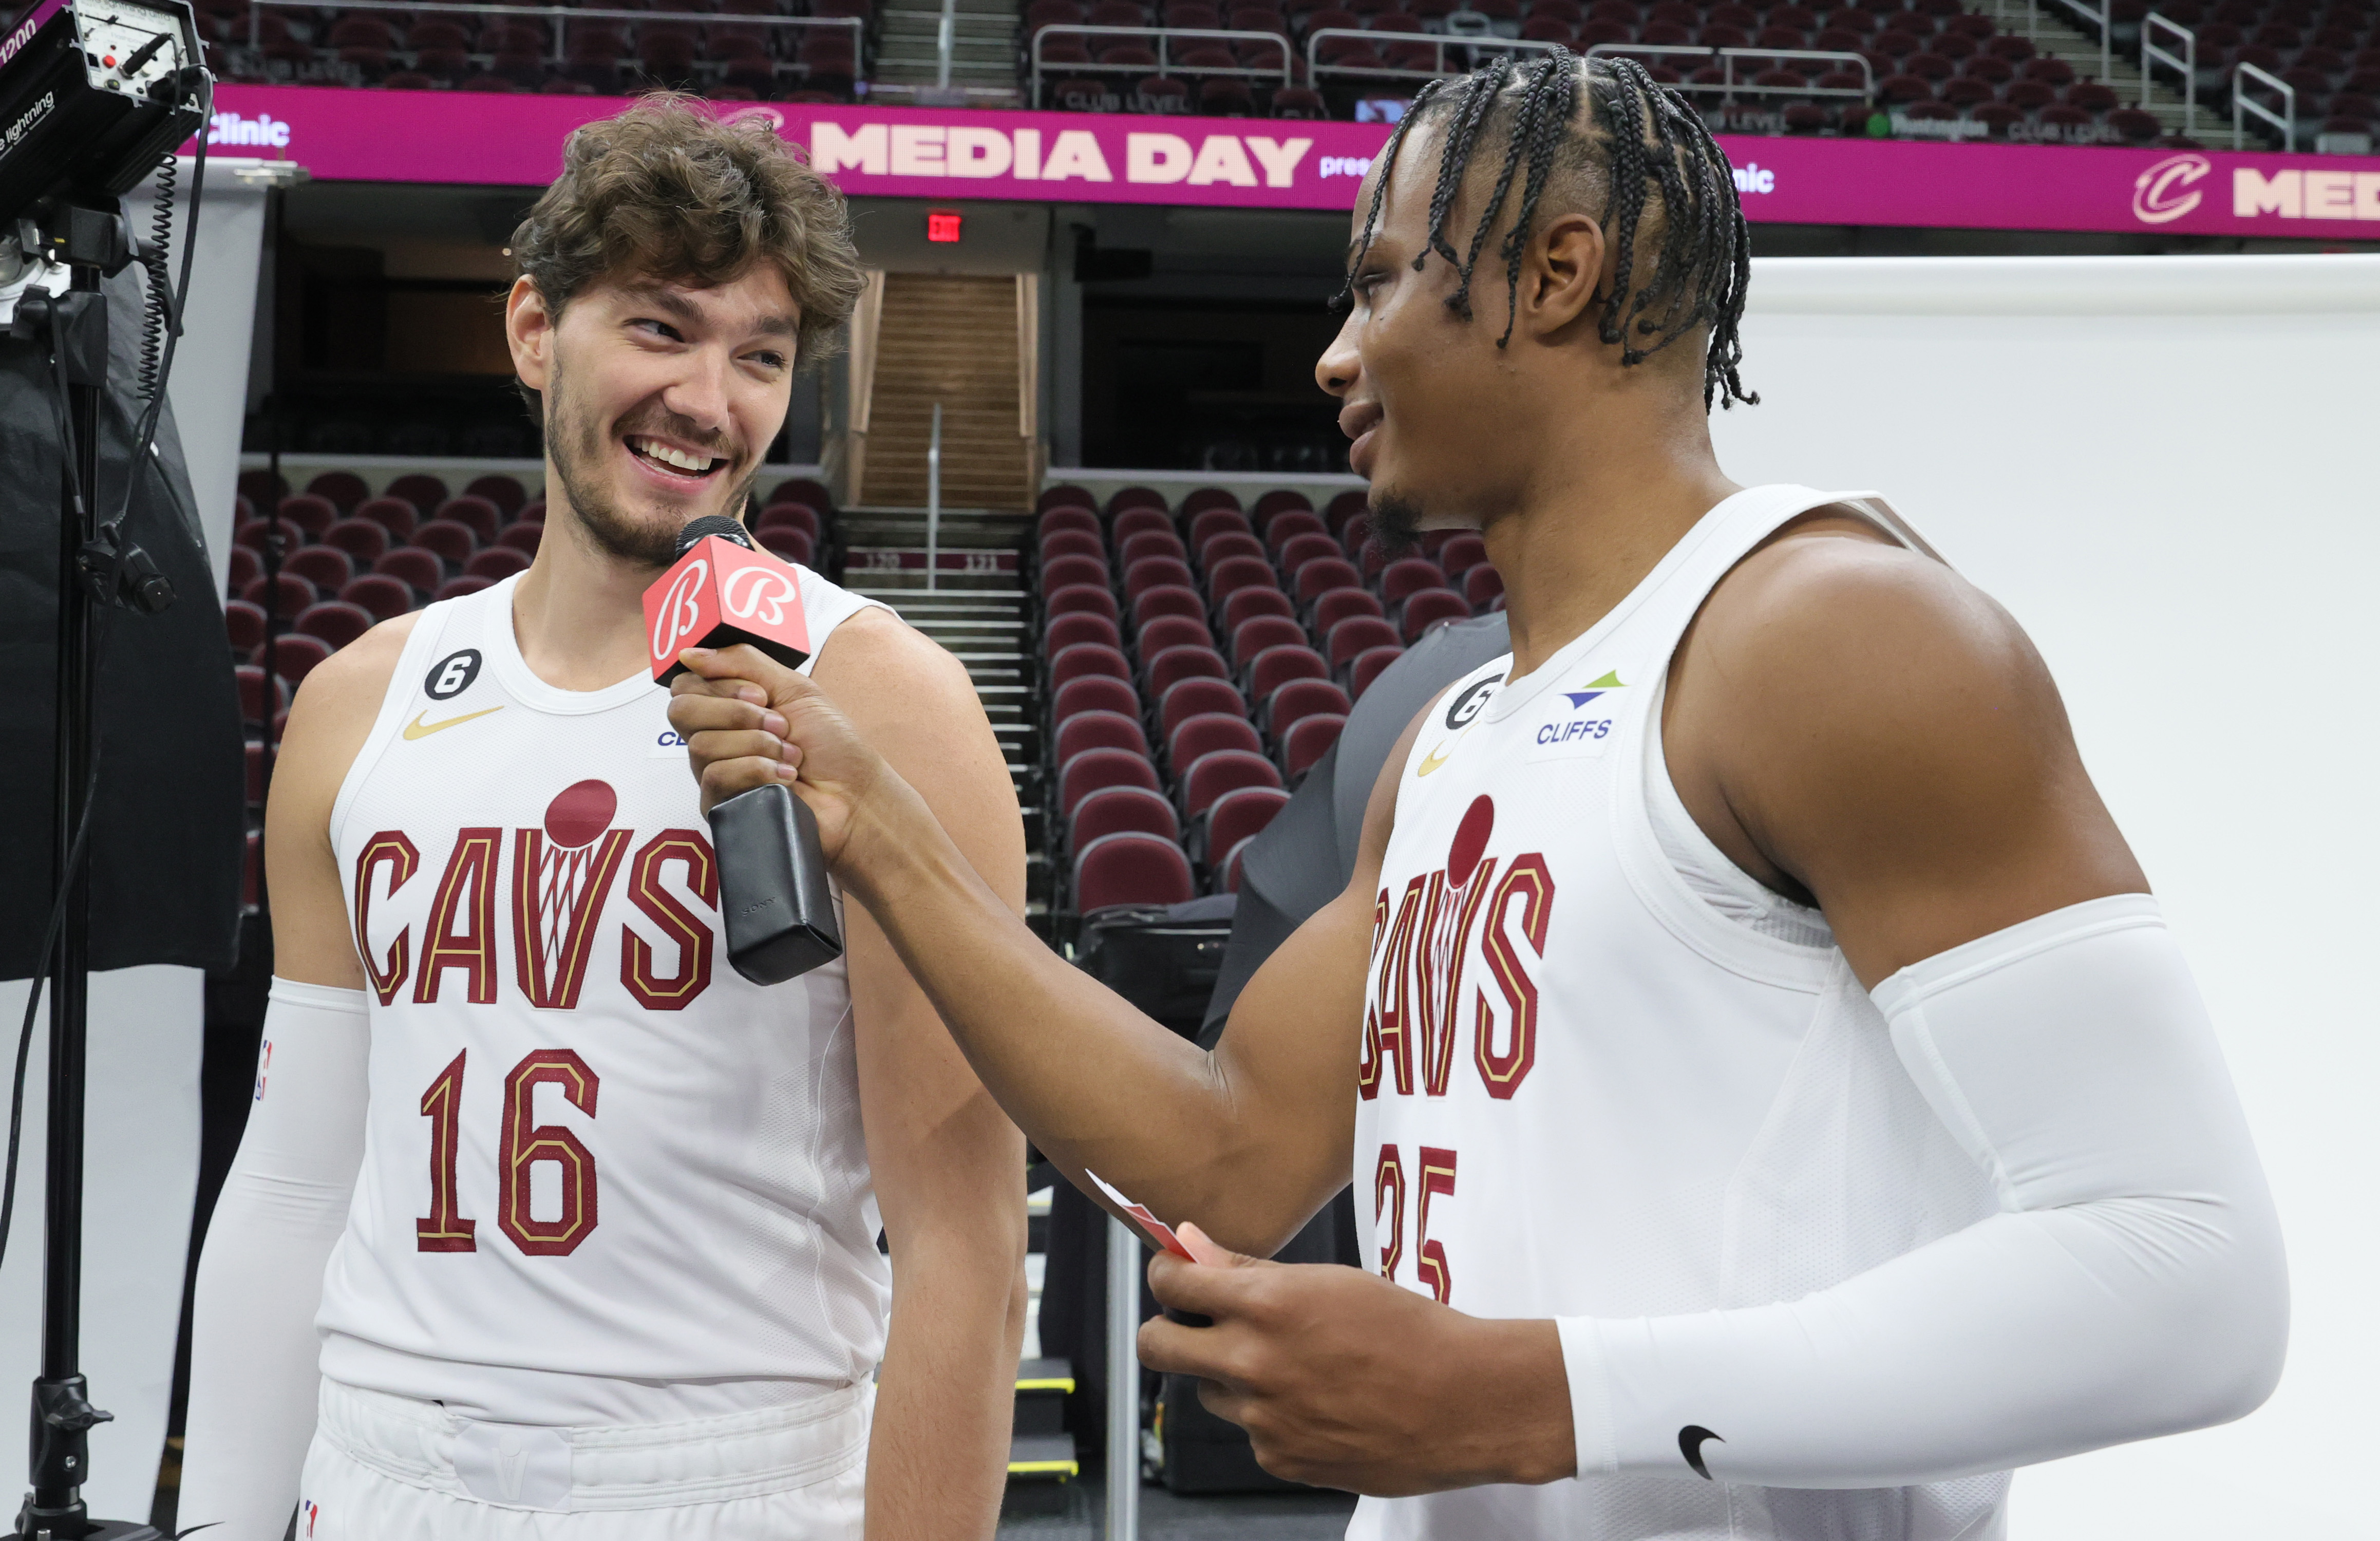 Osman believes Cavs will 'surprise a lot of teams this year